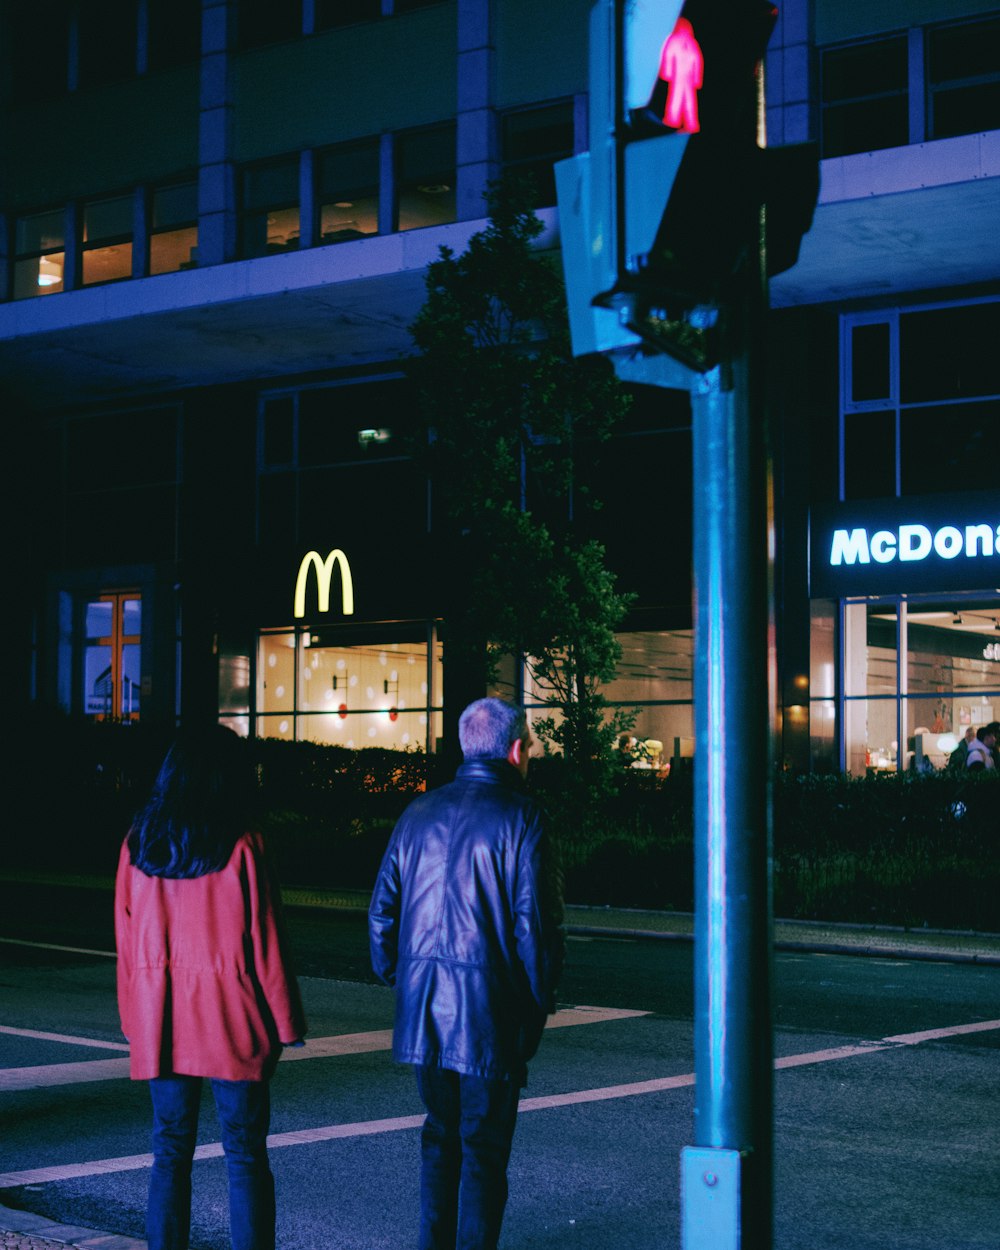 a man and a woman walking down a street at night